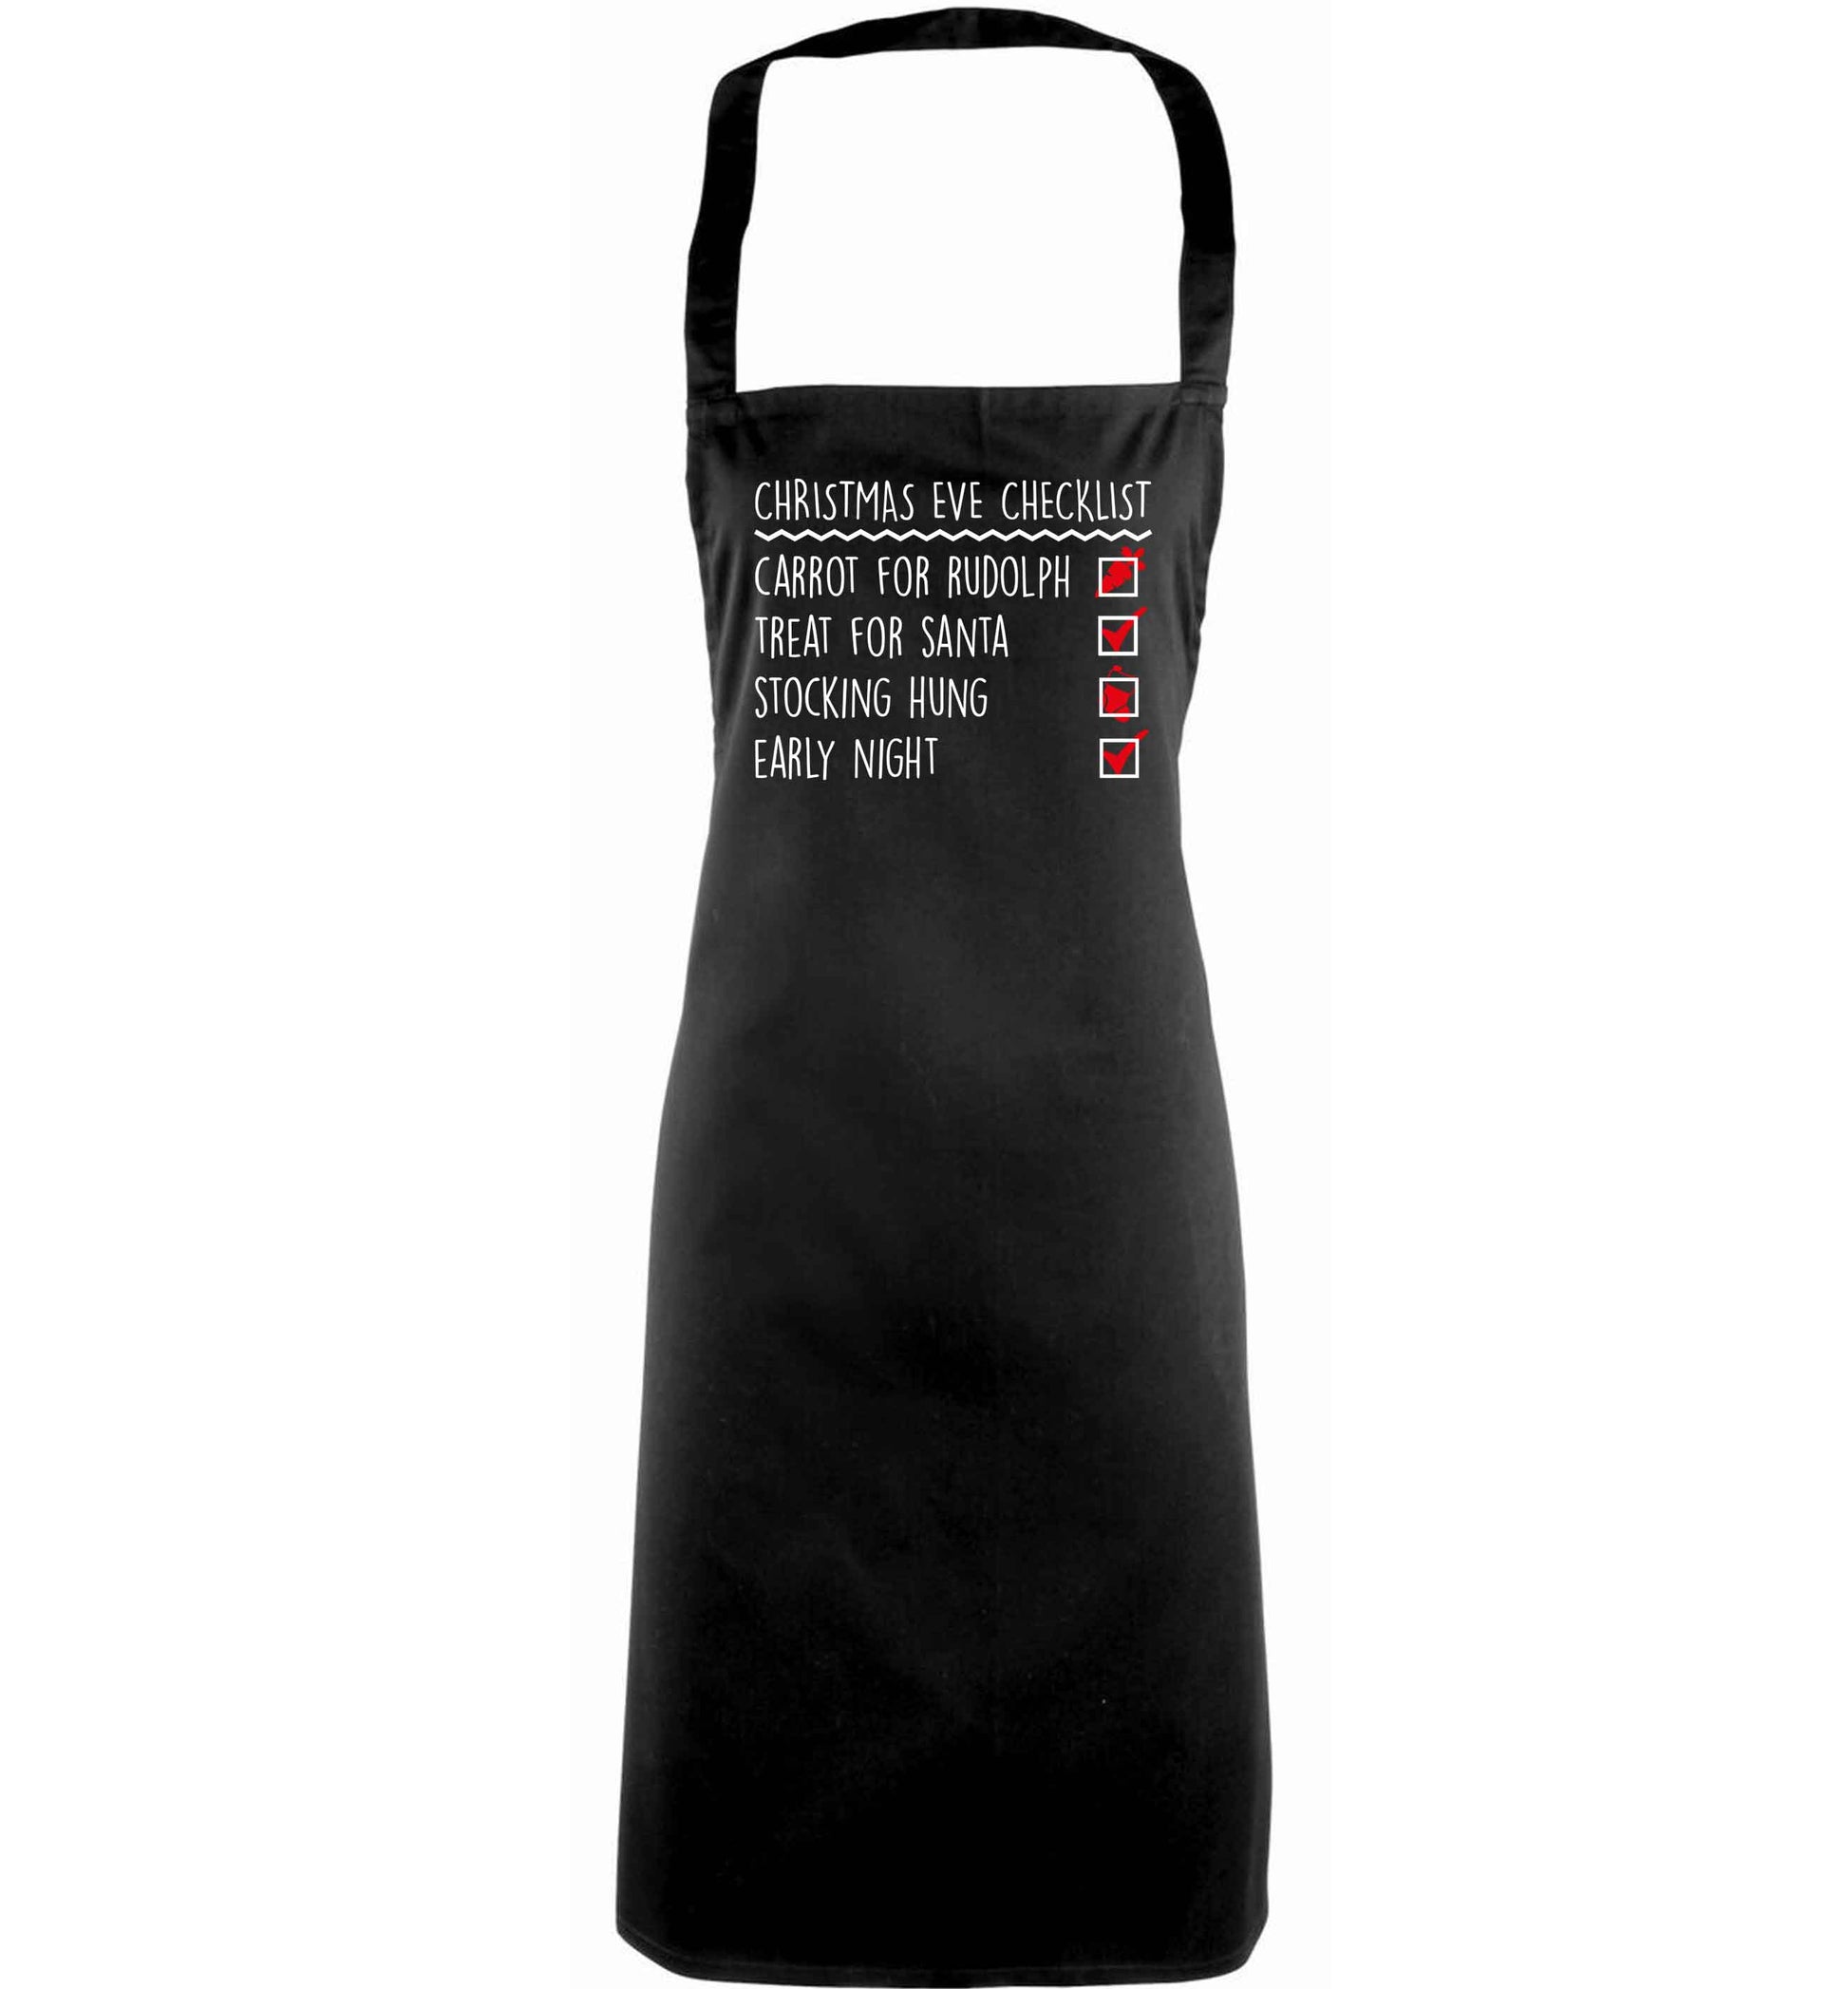 Candy Canes Candy Corns adults black apron